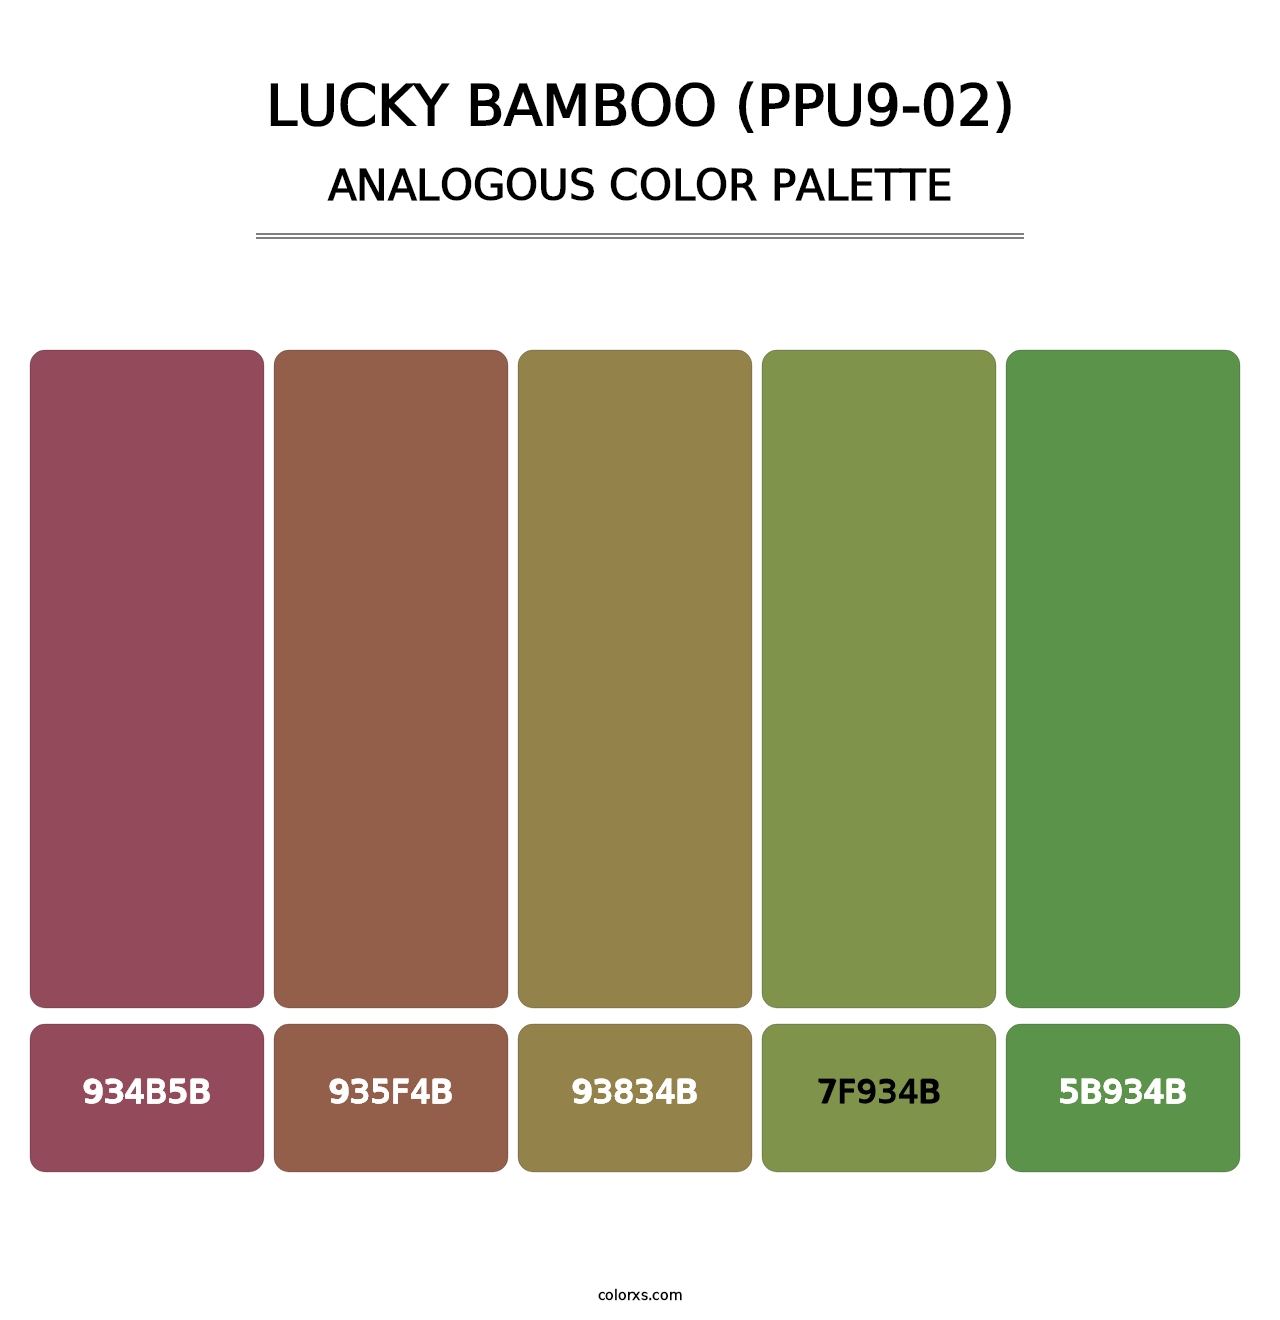 Lucky Bamboo (PPU9-02) - Analogous Color Palette